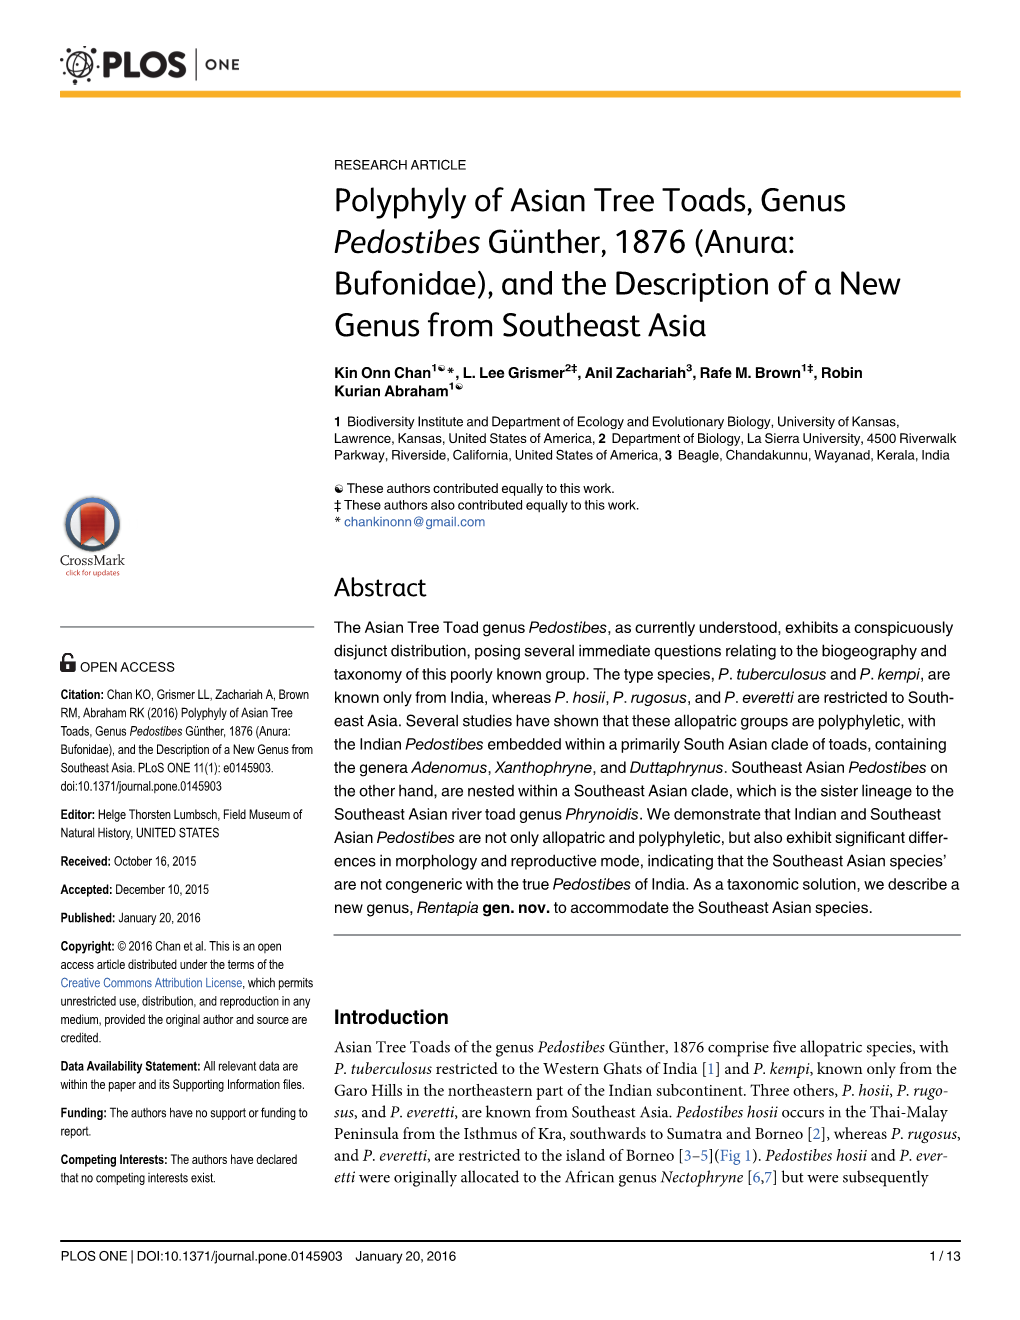 Polyphyly of Asian Tree Toads, Genus Pedostibes Günther, 1876 (Anura: Bufonidae), and the Description of a New Genus from Southeast Asia